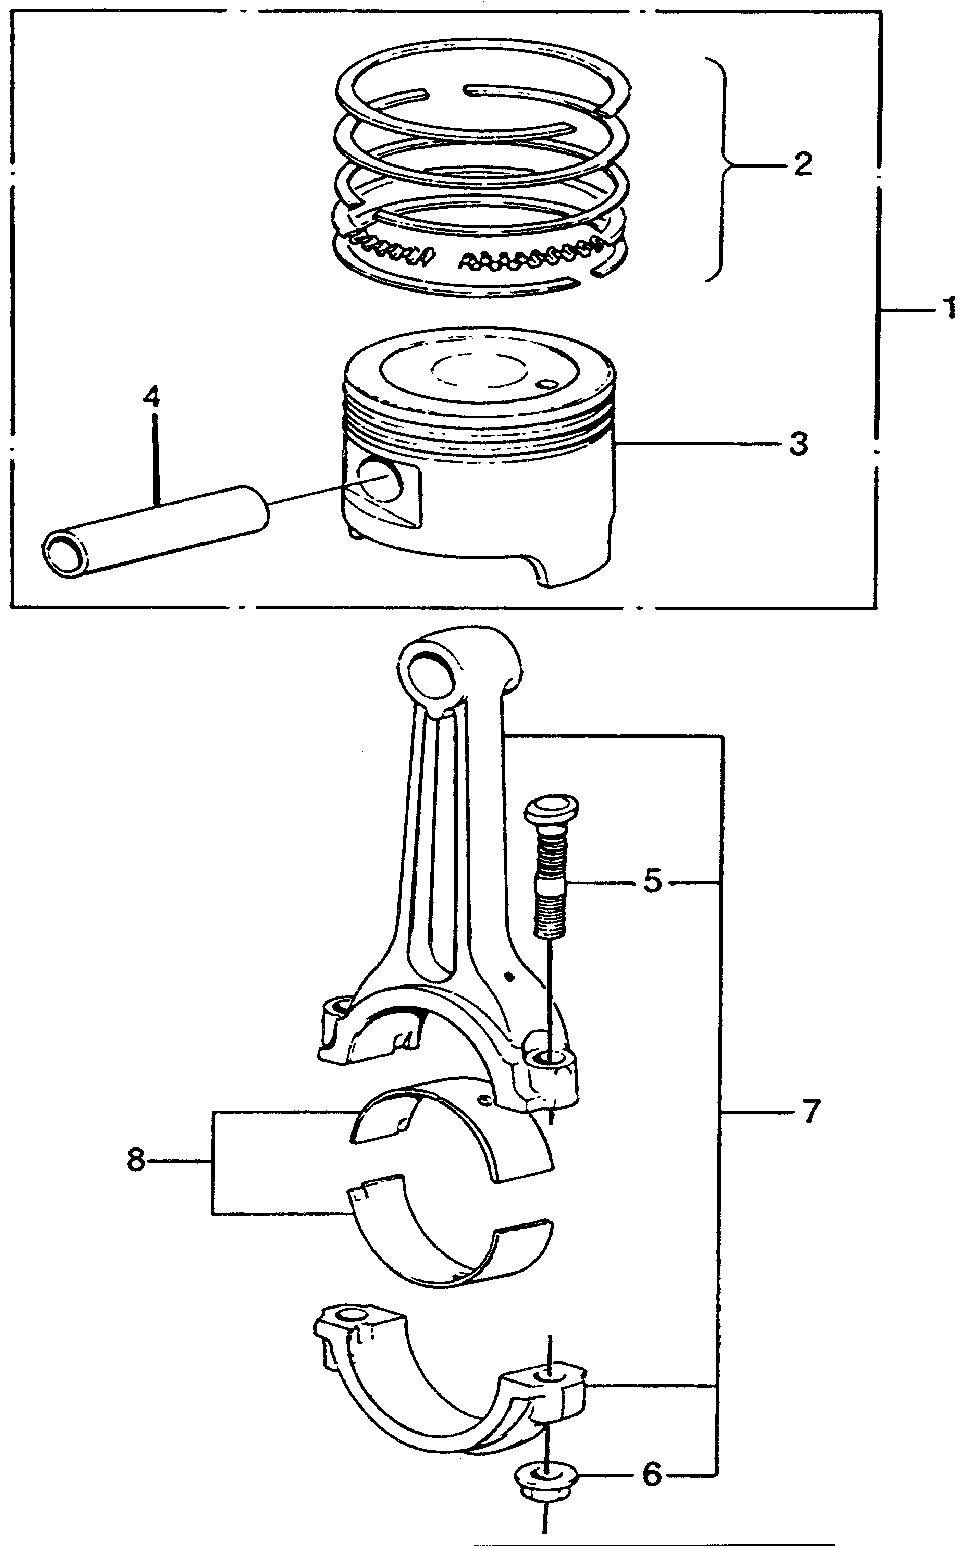 13217-634-960 - BEARING G, CONNECTING ROD (RED) (DAIDO)